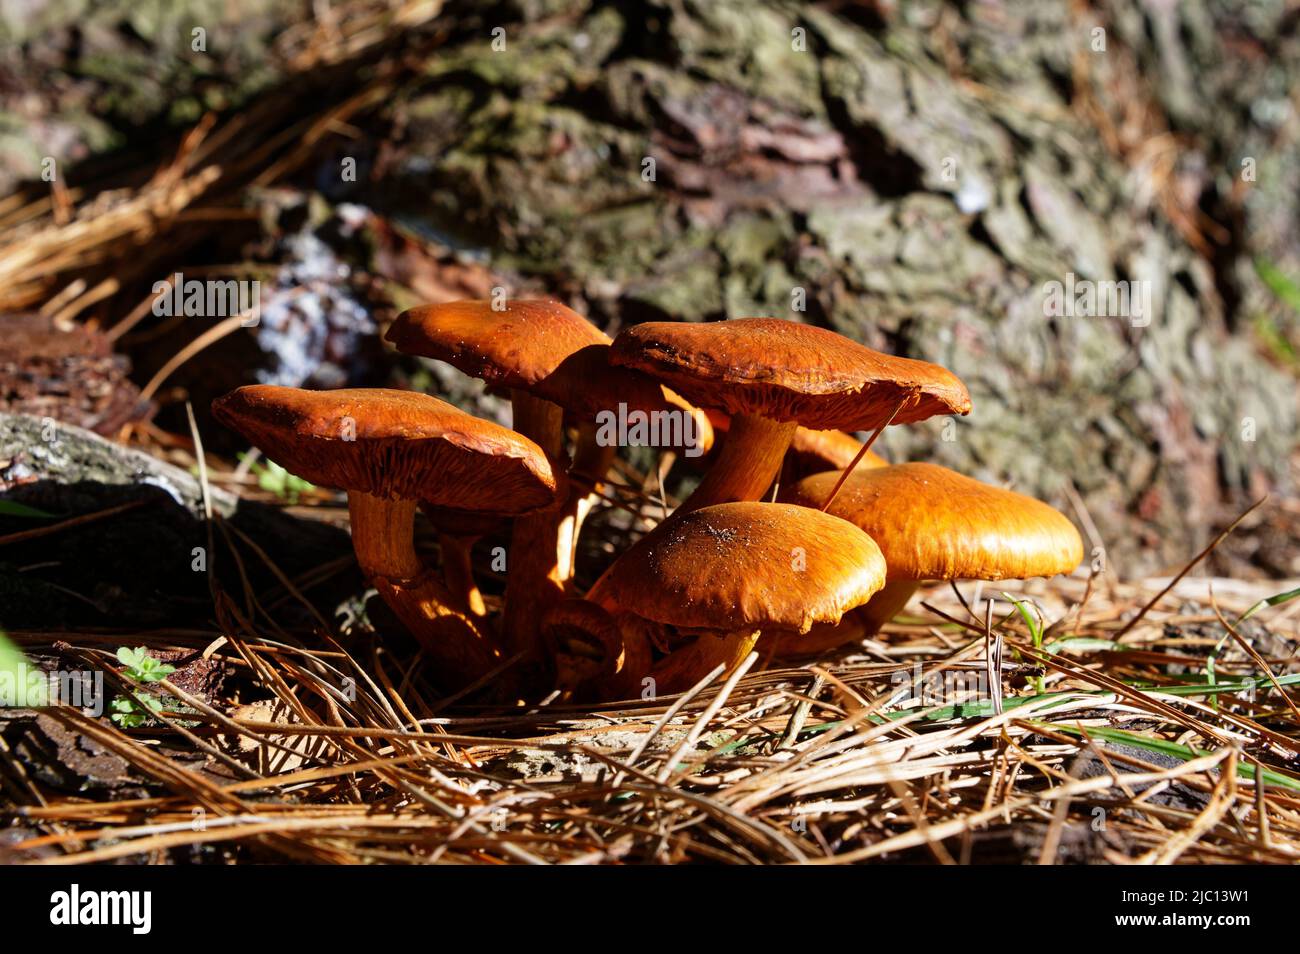 Brown mushrooms, photographed side on, have grown through the needles dropped by a tree. Their gills are visible. Stock Photo